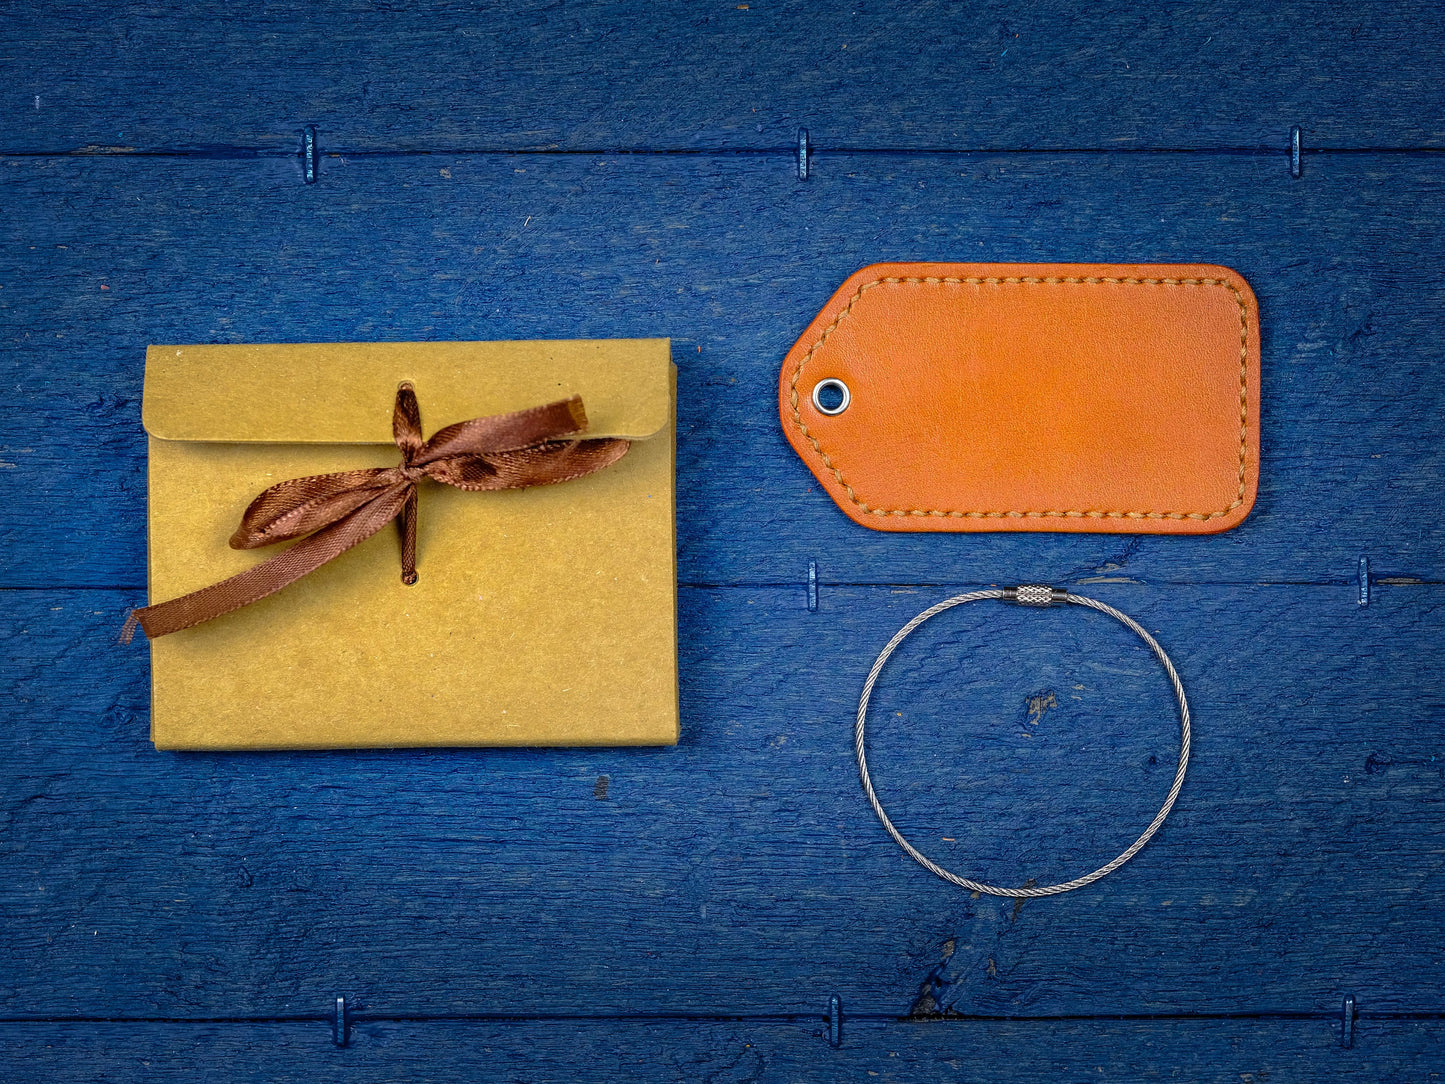 Leather Luggage Tag - Travel Definition